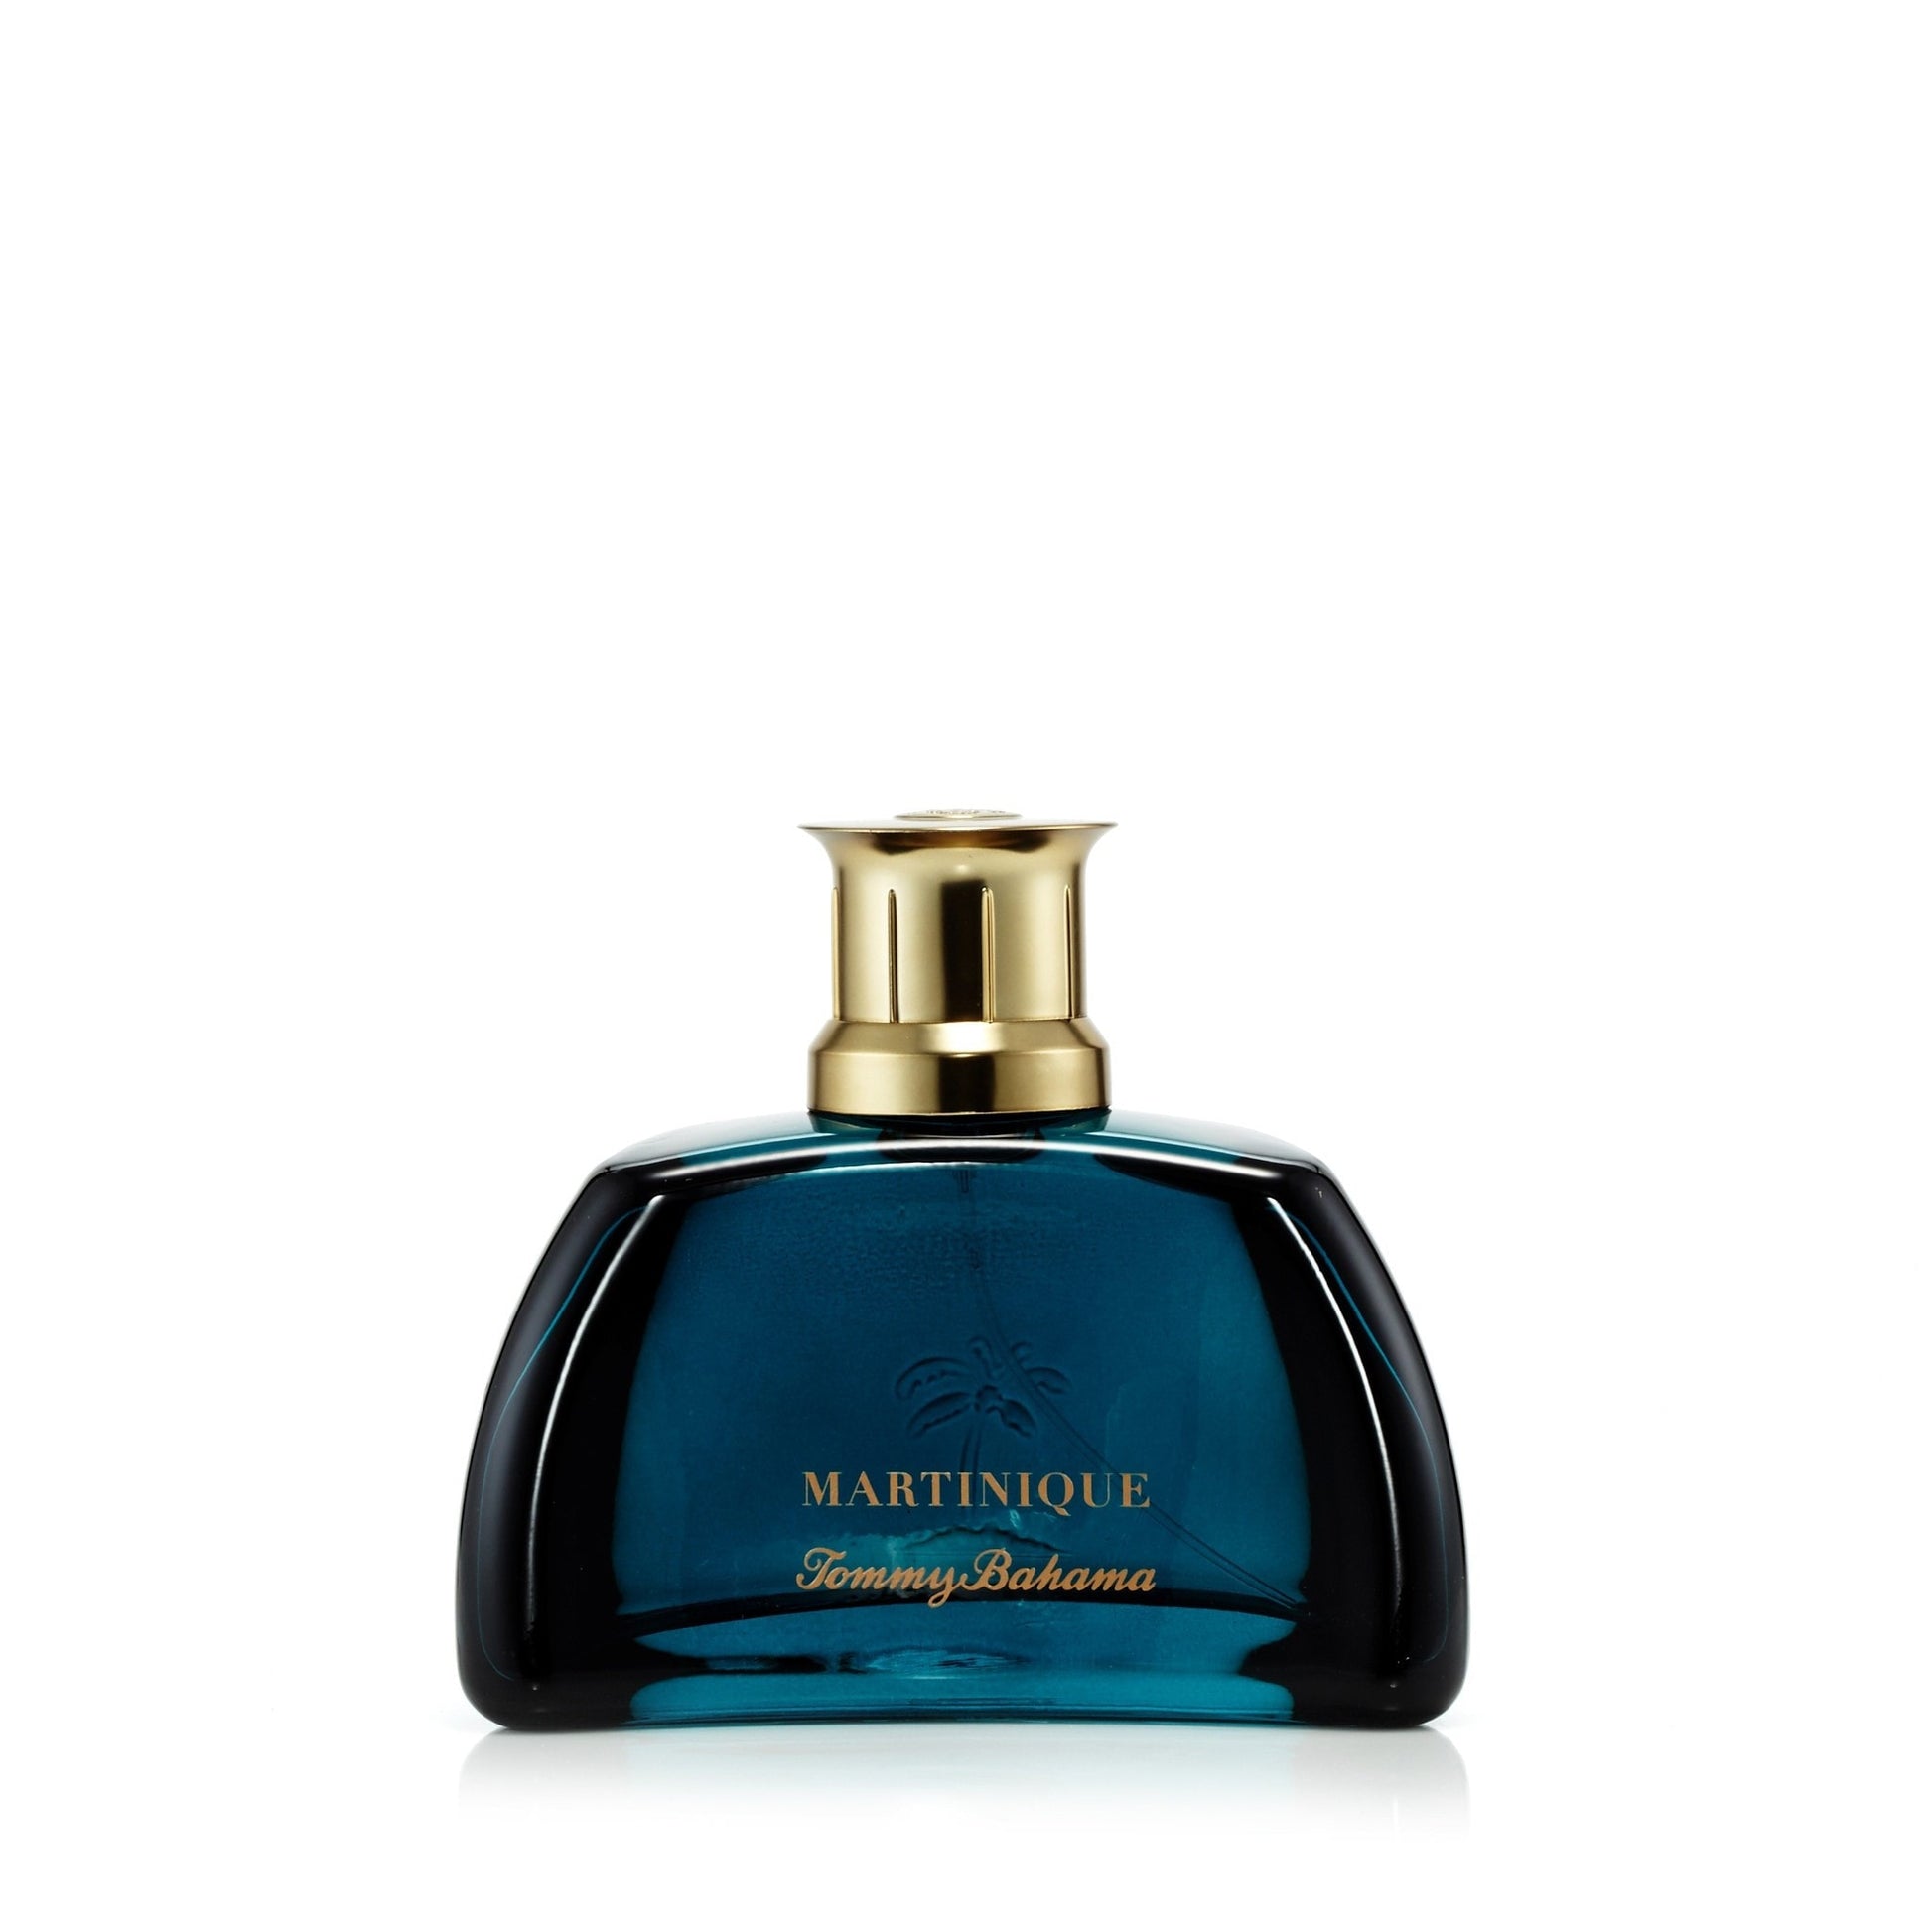 Set Sail Martinique Eau de Cologne Spray for Men by Tommy Bahama 3.4 oz. Click to open in modal